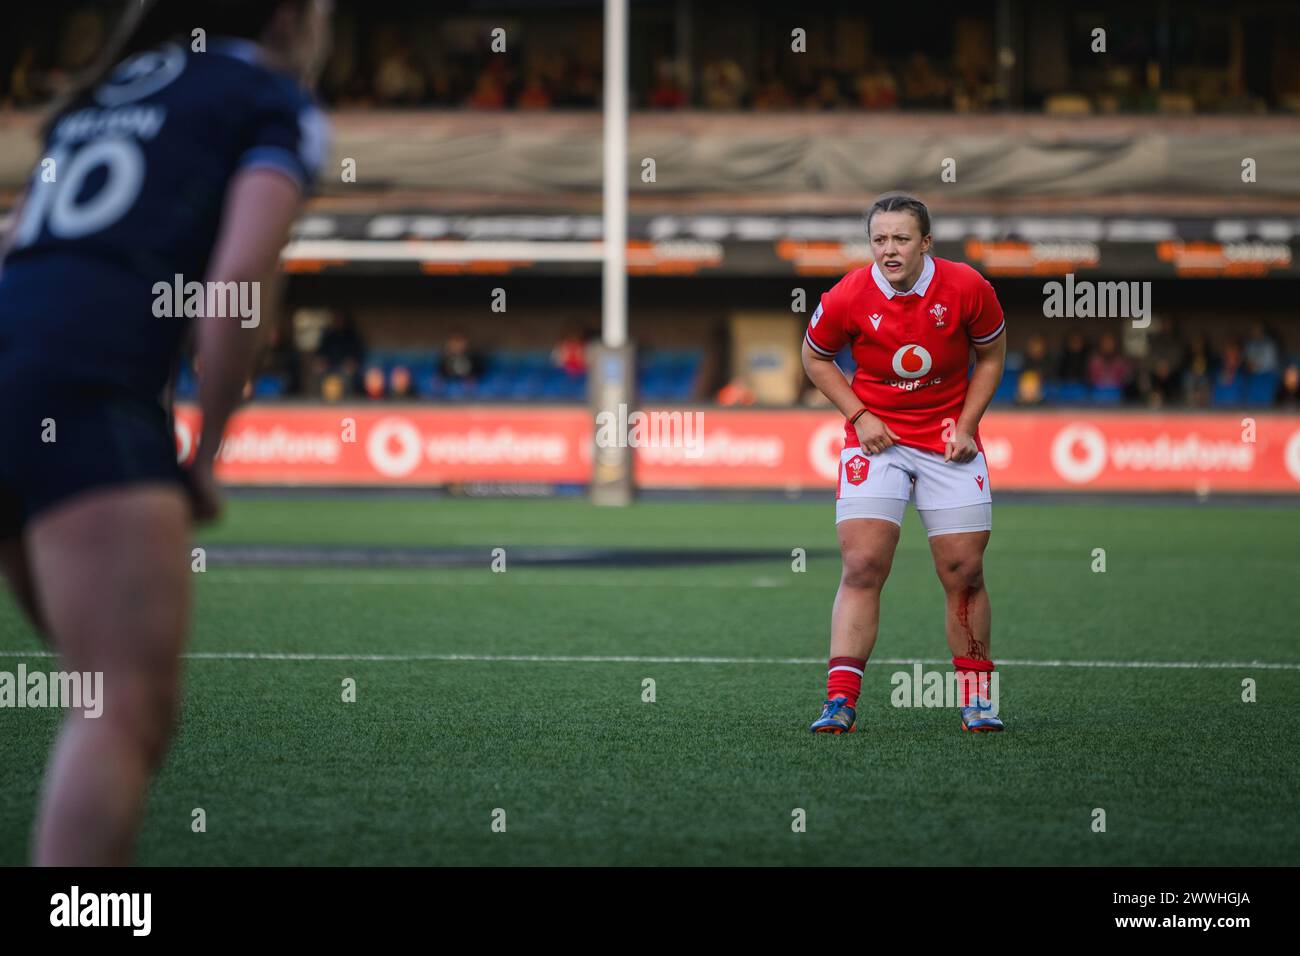 Cardiff, Wales. 23rd March 2024. Lleucu George during the Women’s Six Nations rugby match, Wales versus Scotland at Cardiff Park Arms Stadium in Cardiff, Wales. Credit: Sam Hardwick/Alamy Live News. Stock Photo